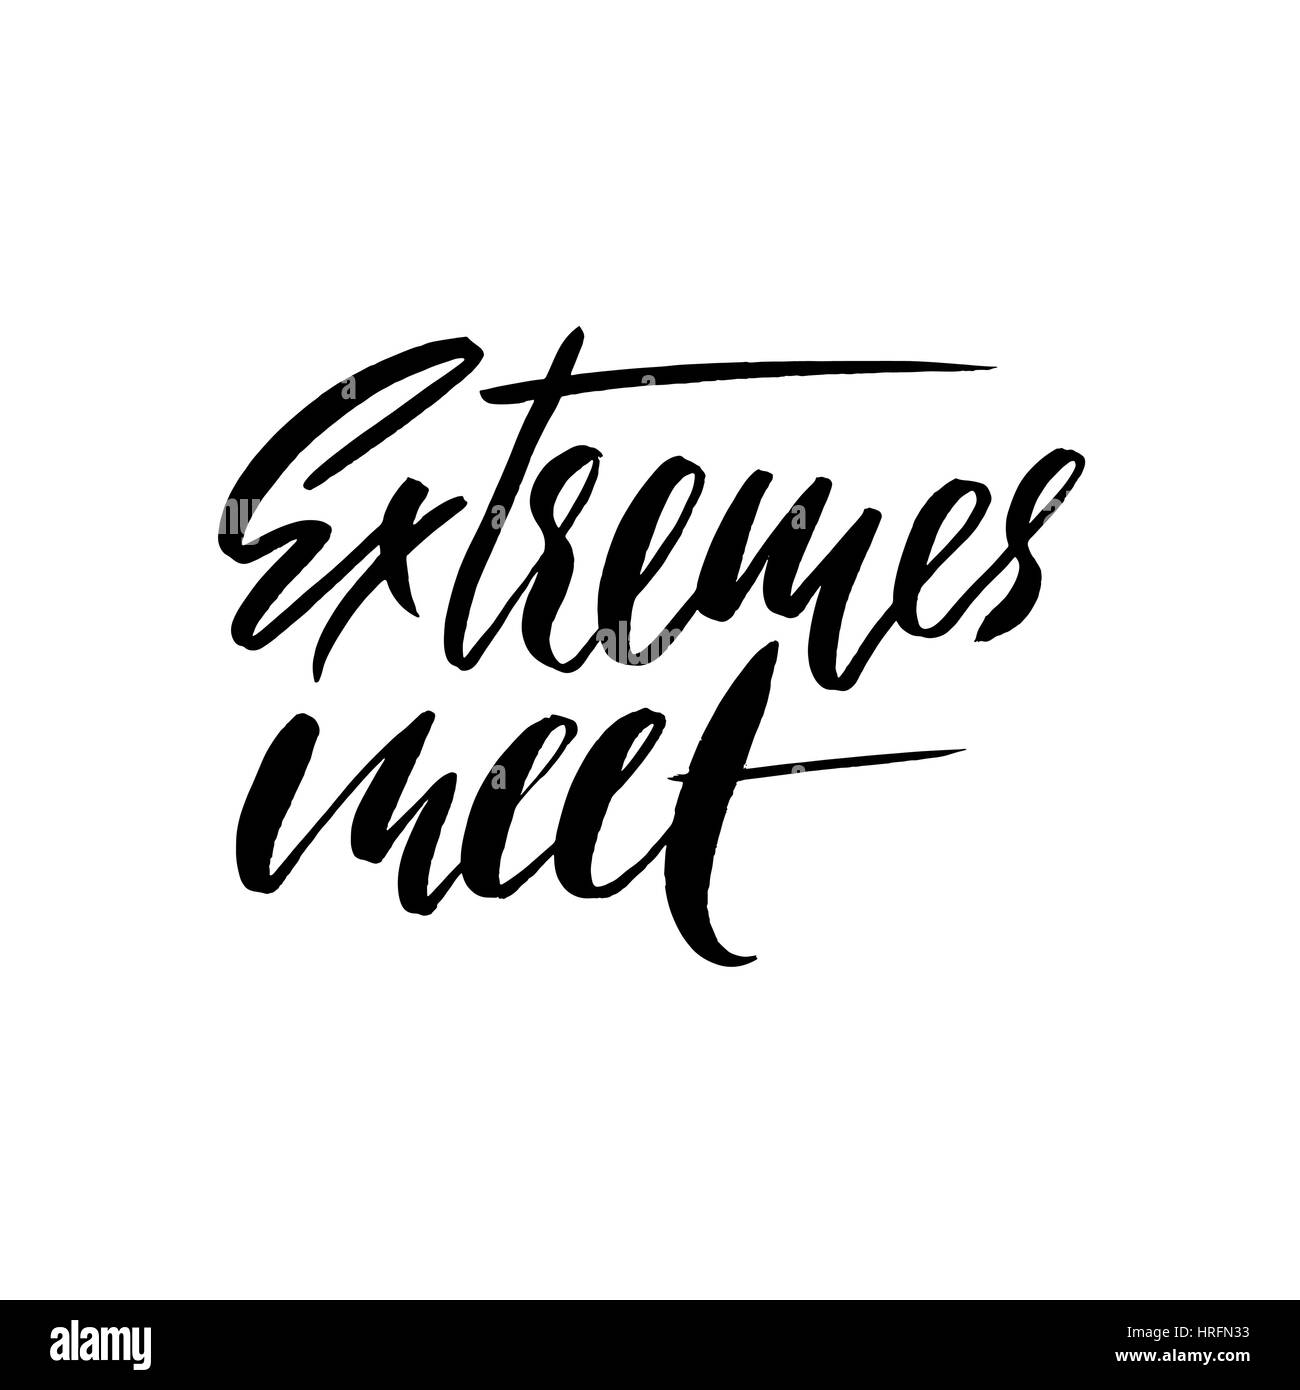 Extremes Meet Hand Drawn Lettering Proverb Vector Typography Design Handwritten Inscription 5283